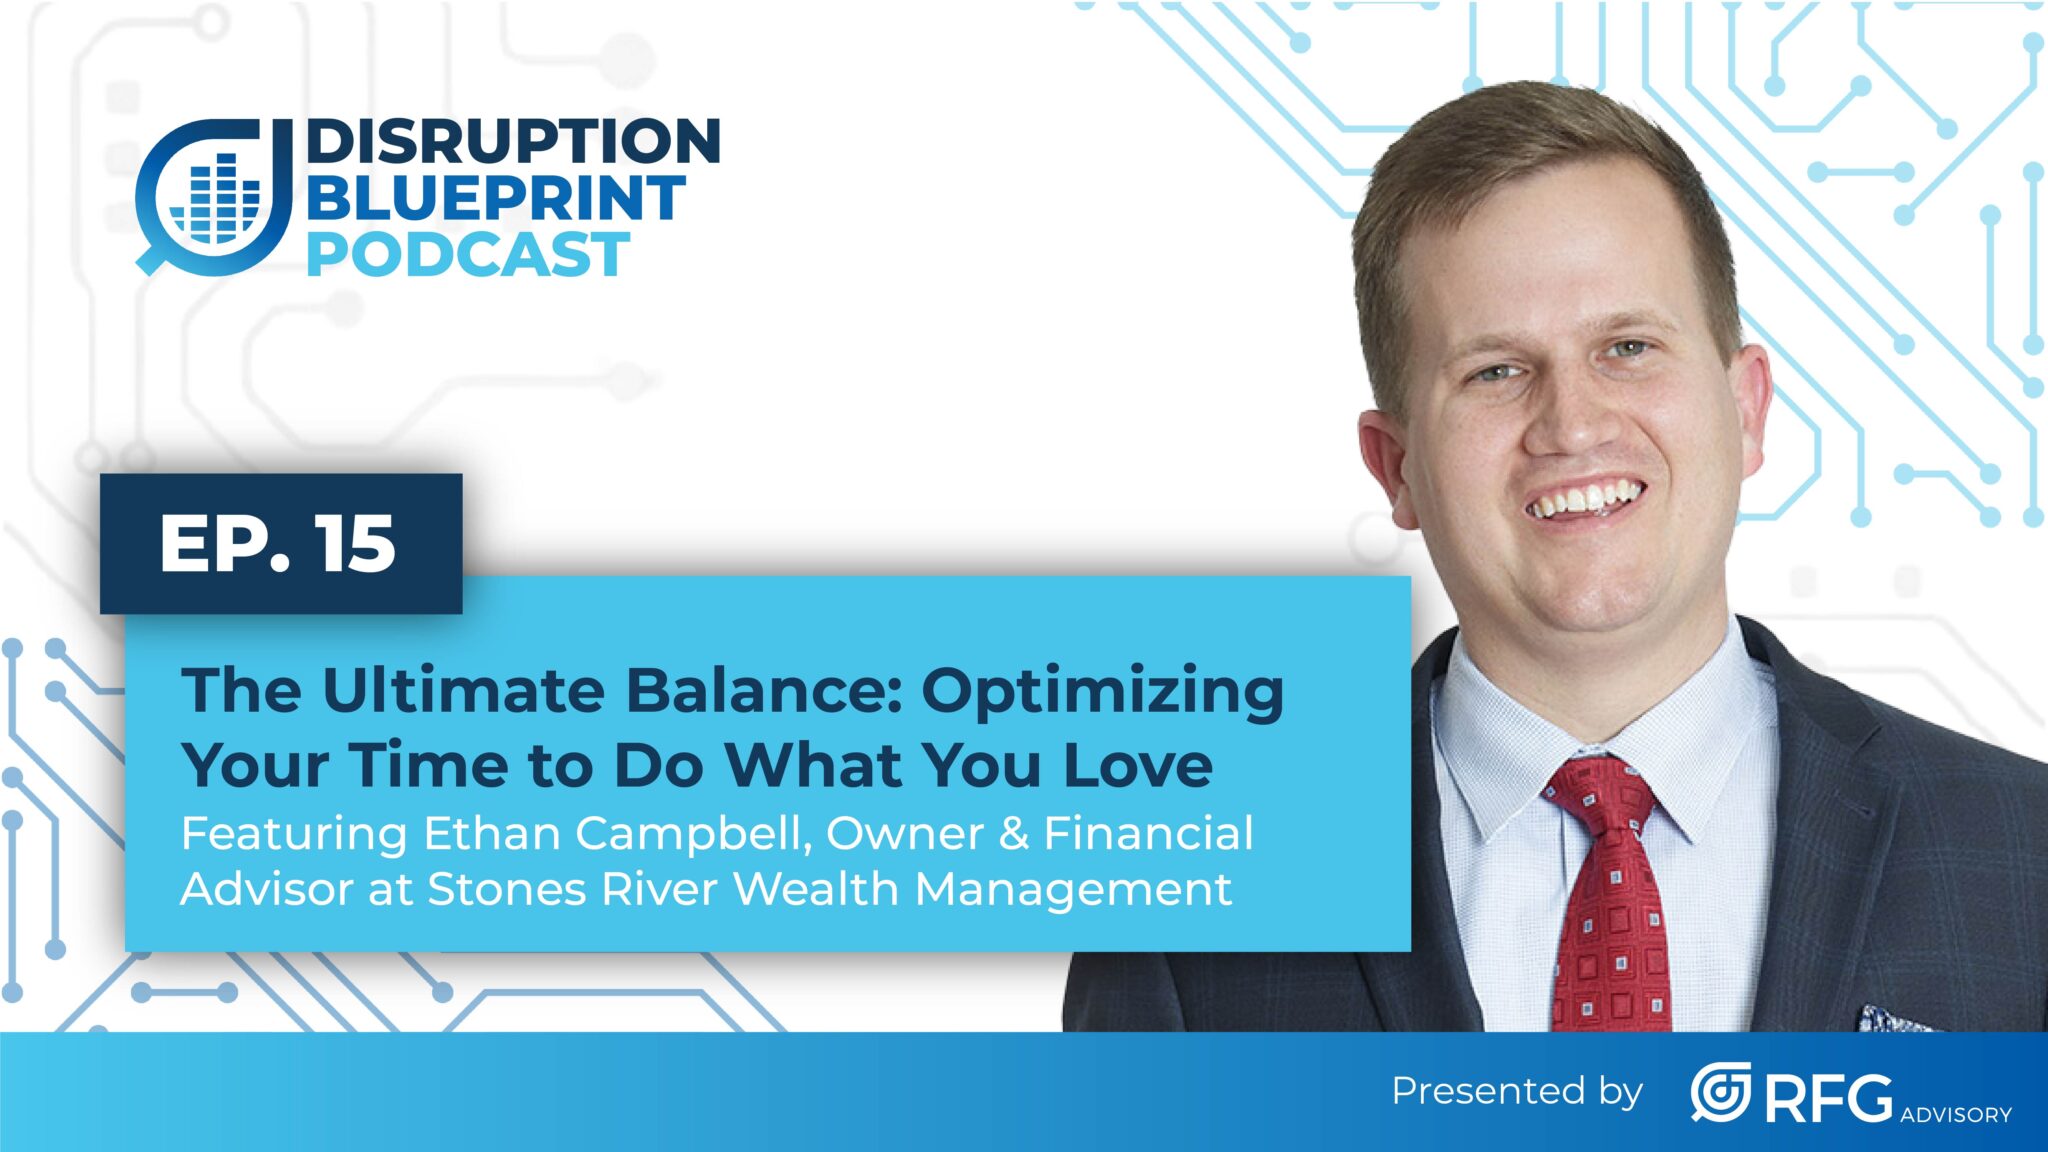 Ep. 15 The Ultimate Balance: Optimizing Your Time to Do What You Love ft. Ethan Campbell, Owner & Financial Advisor at Stones River Wealth Management